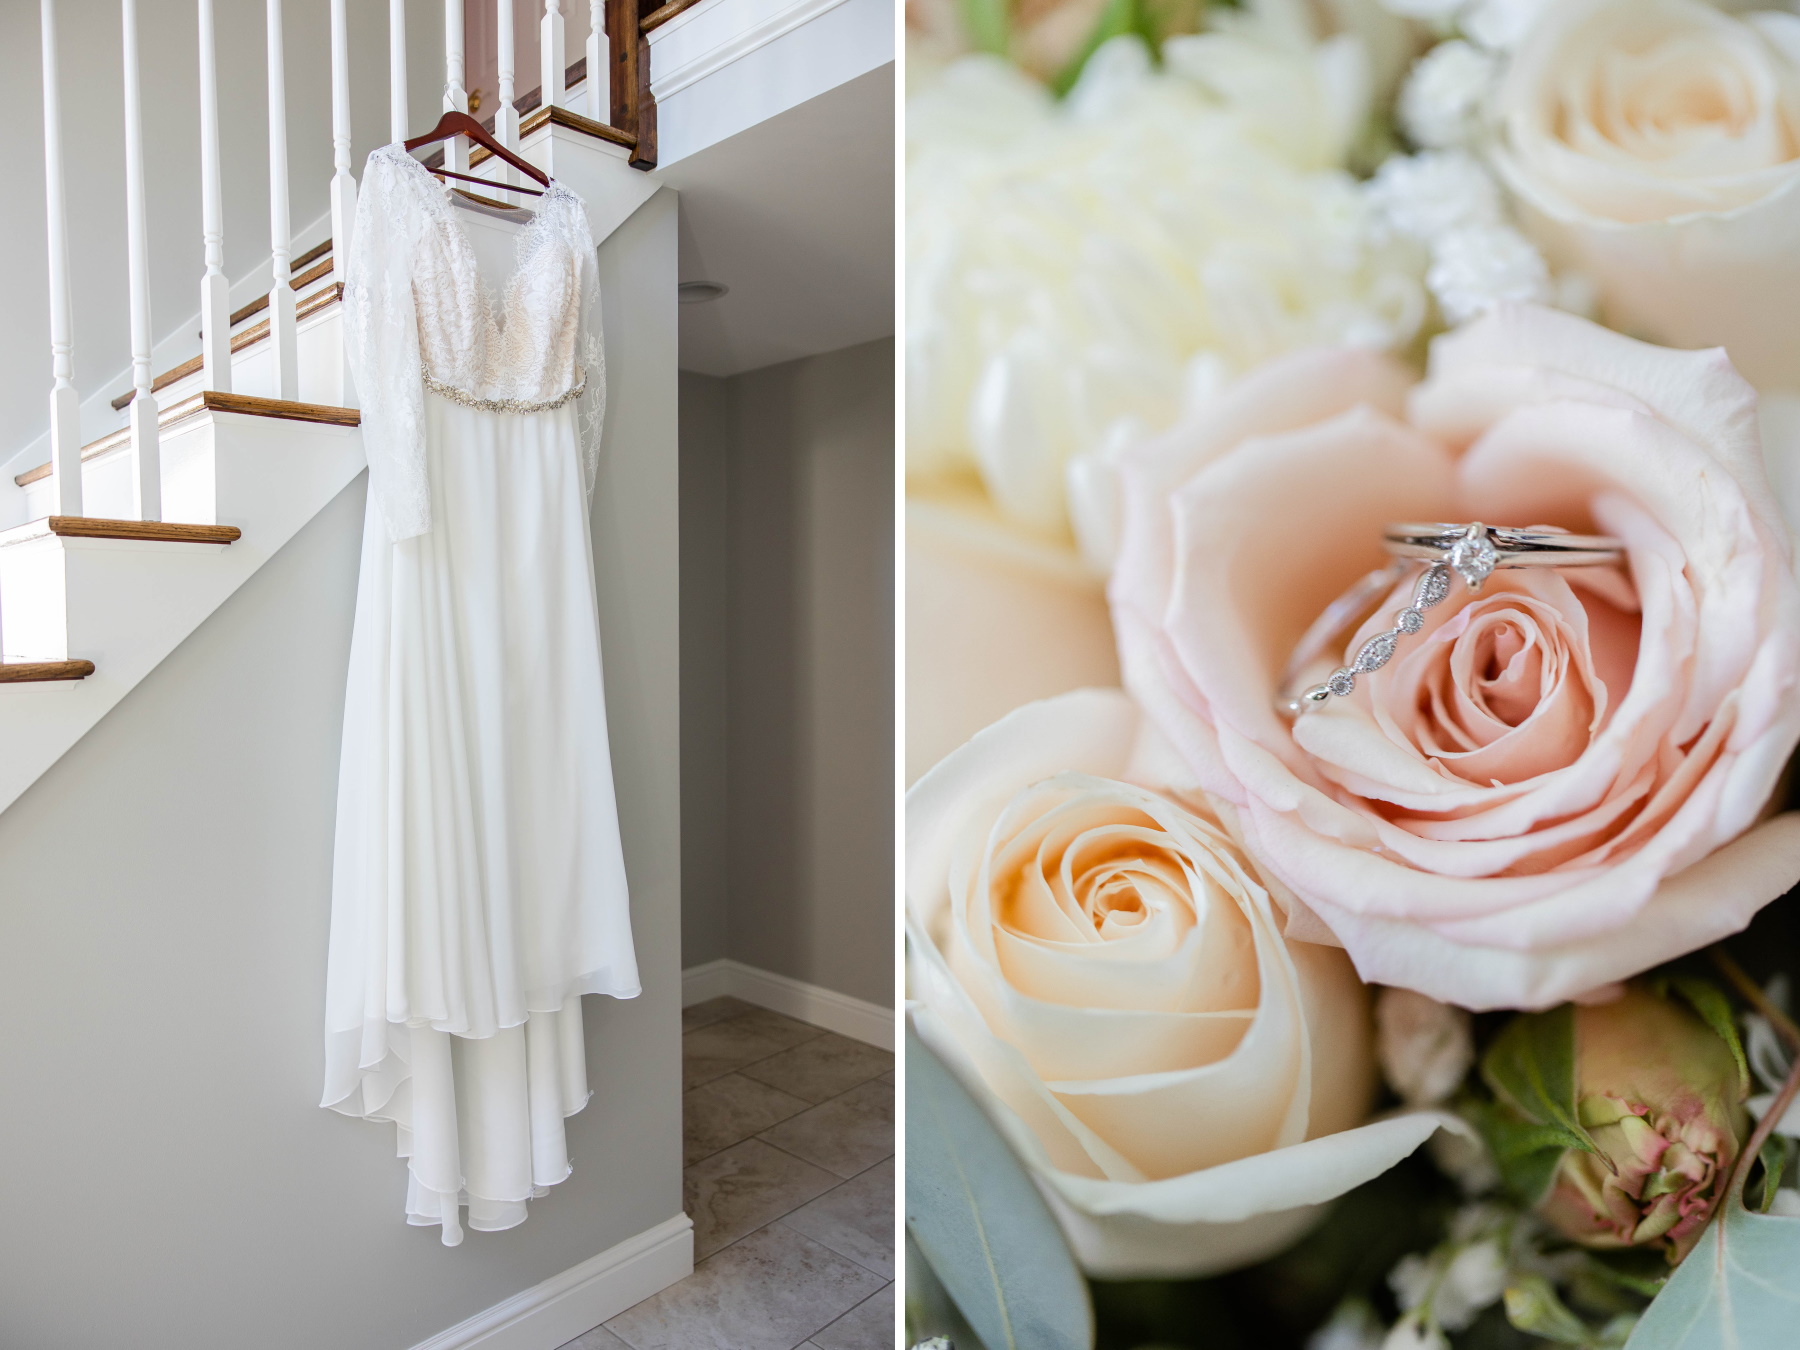 Left image features wedding dress hanging on stair railing. Right image features two rings placed in a blush pink rose from Emerald Wedding at Great Neck Country Club in Waterford CT